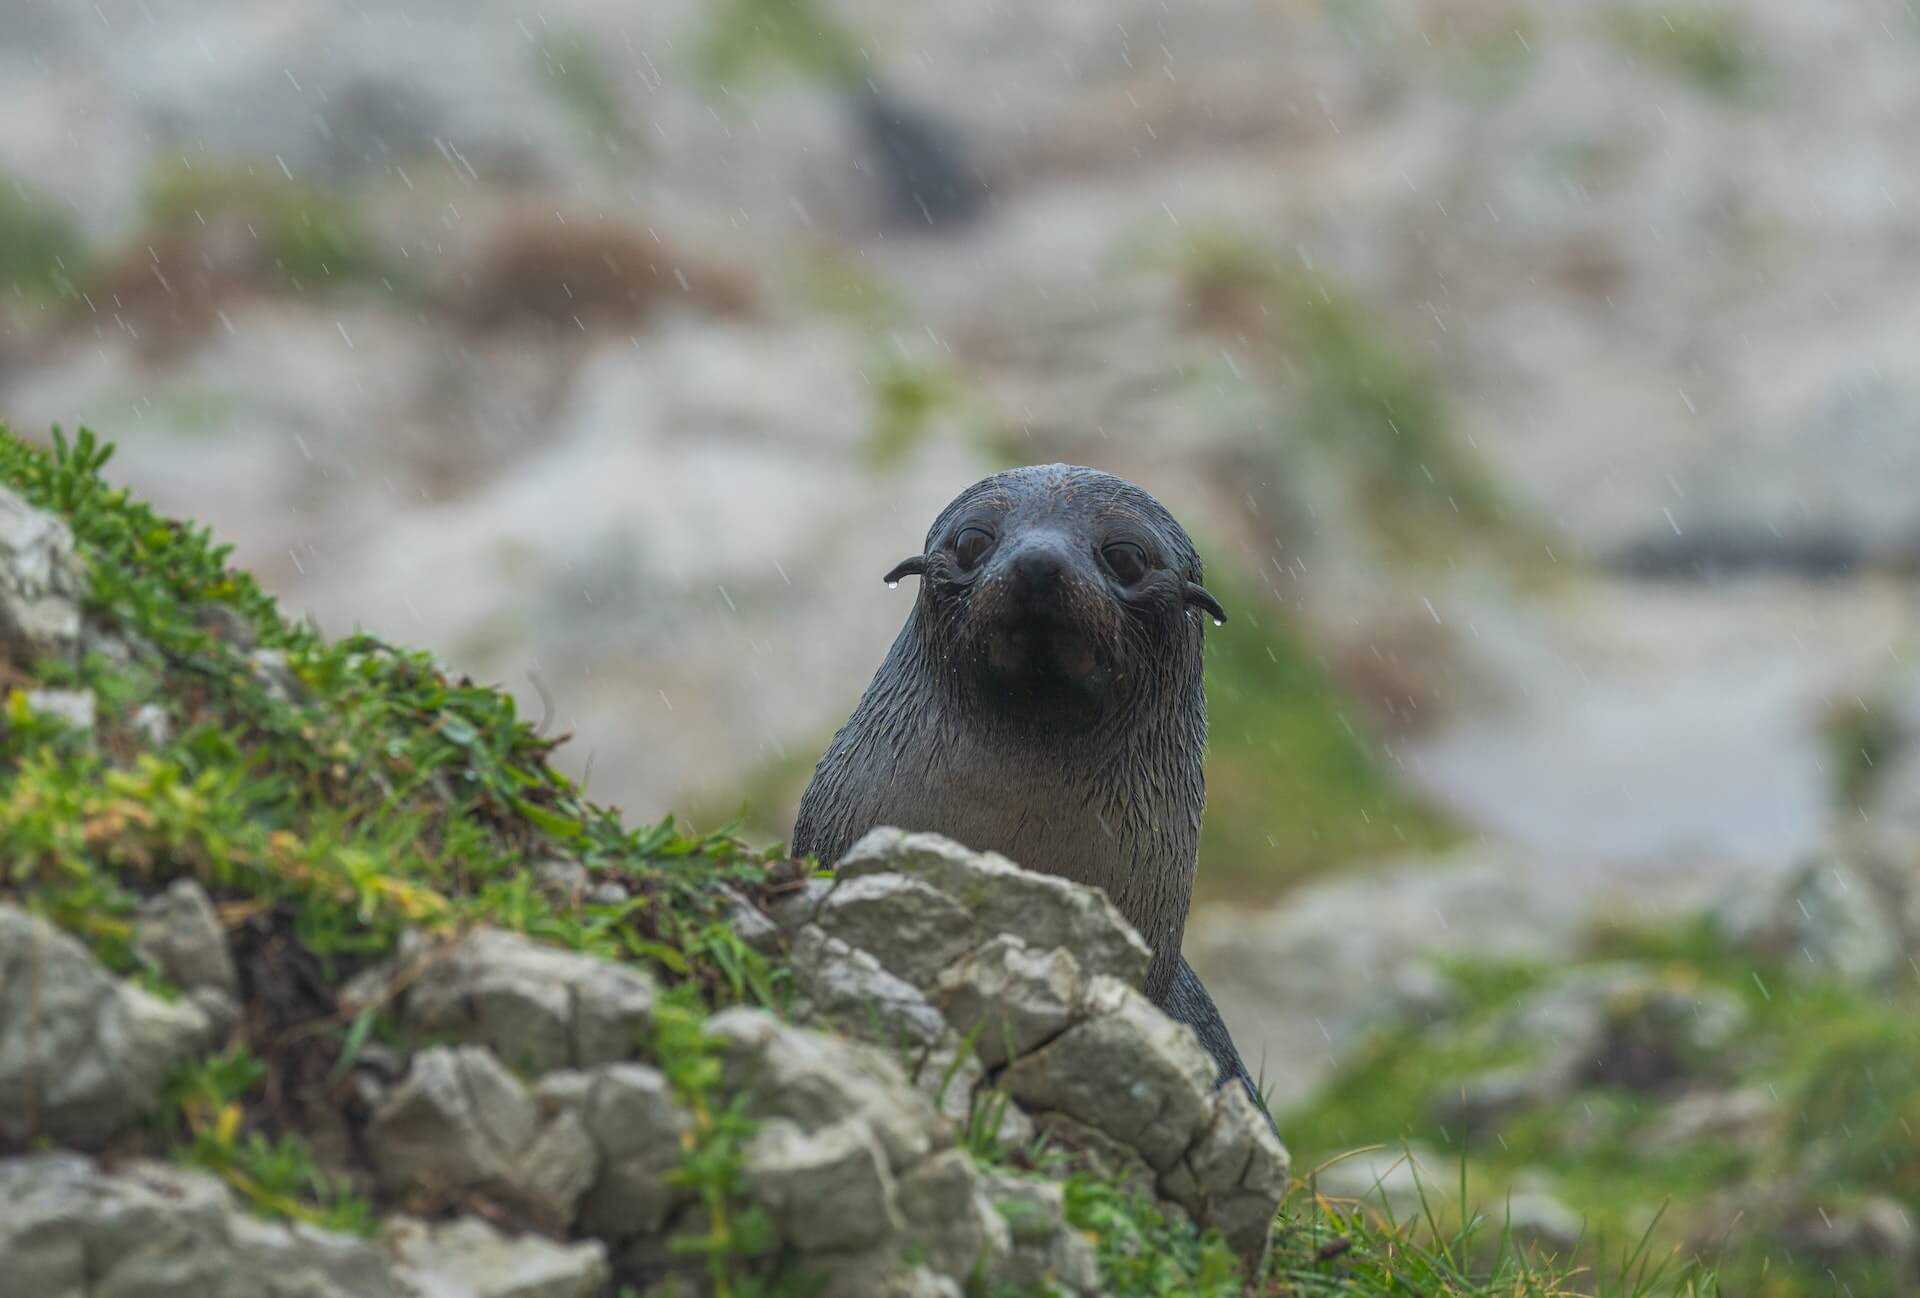  A brown fur seal peeks out behind mossy rocks in the rain. Photo: Ethan Brooke